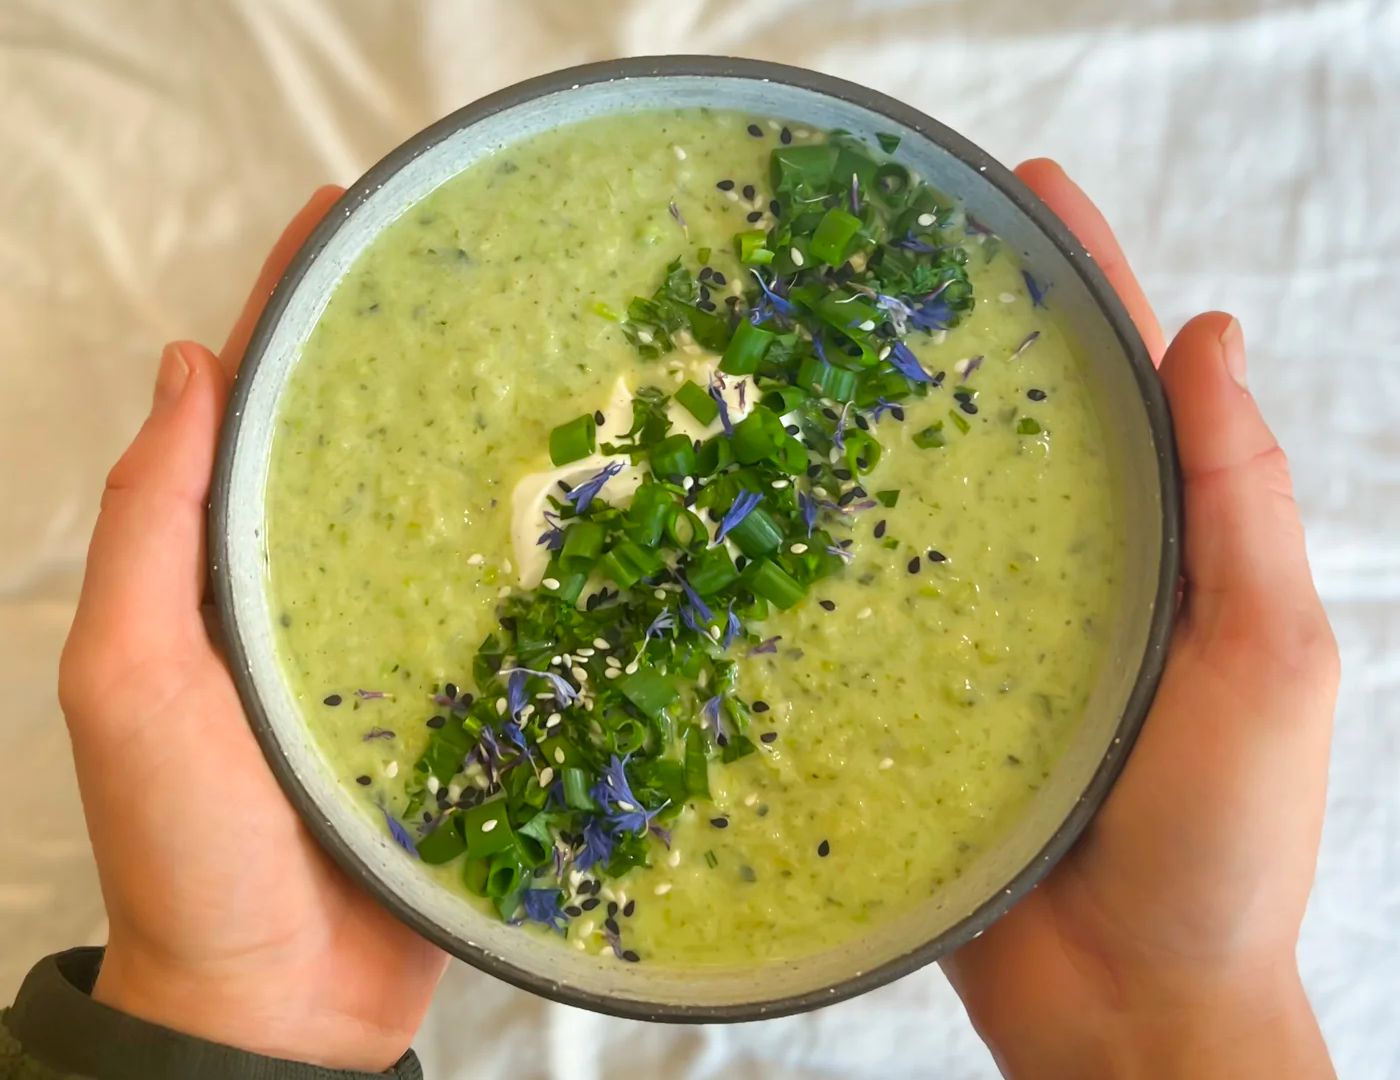 Feed my skin with Jette Saunders - Green Goodness Soup!